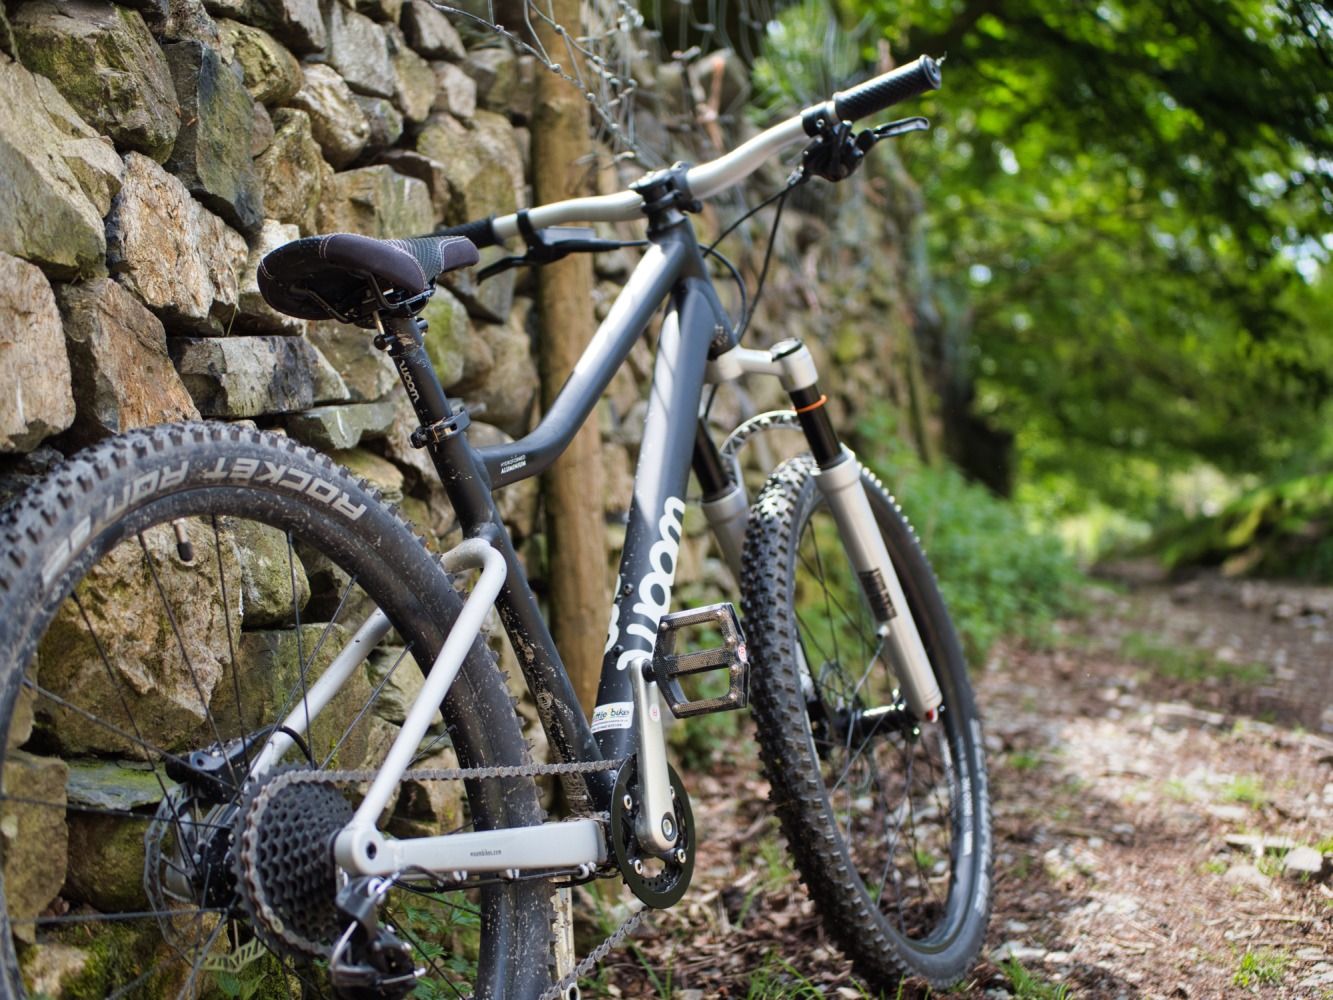 woom OFF AIR 5 review: the woom OFF AIR 5 mountain bike seen from behind, leaning against a wall